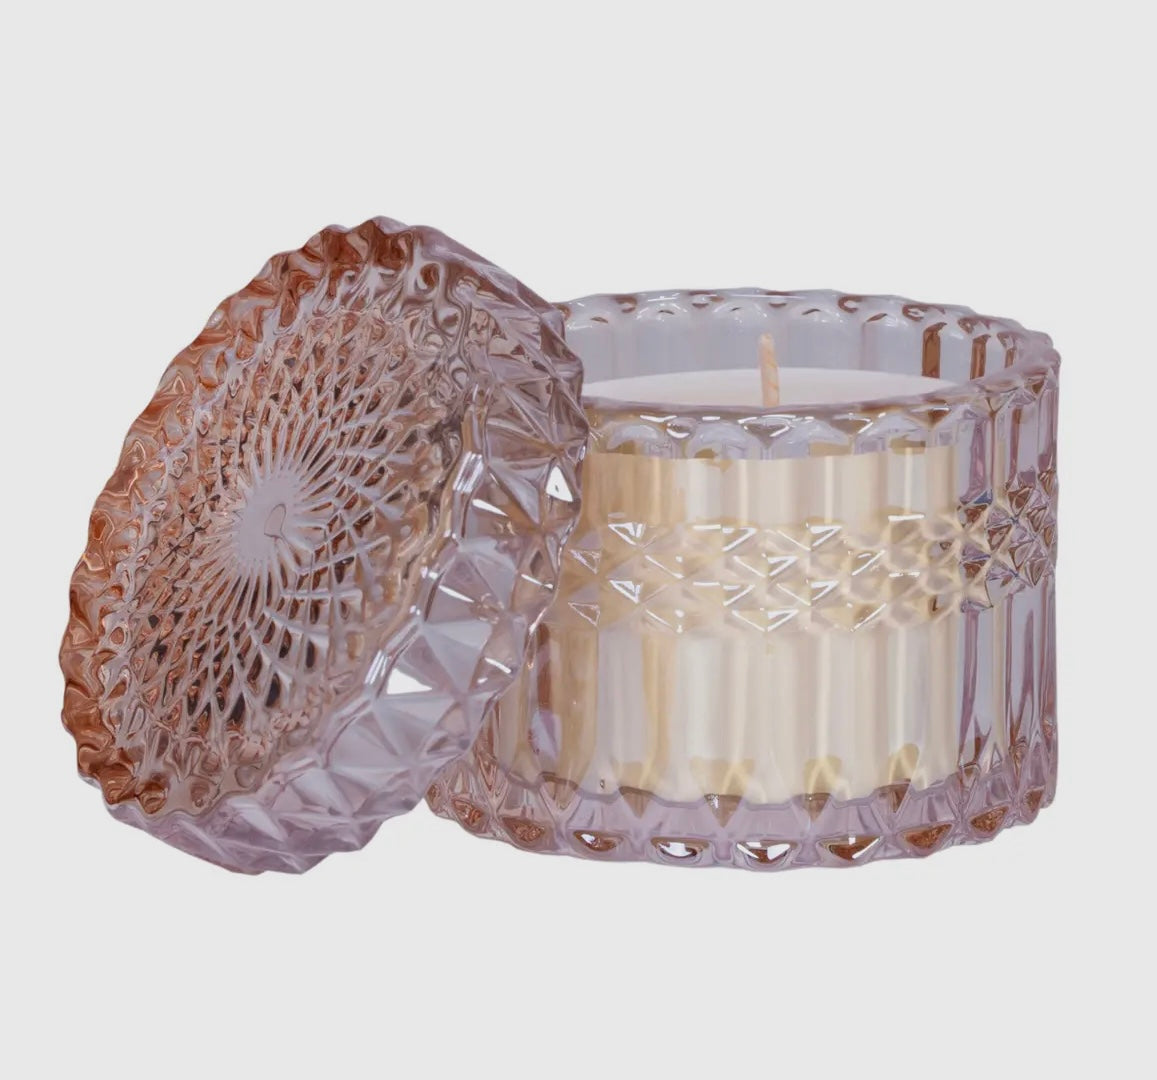 Shimmer Candle